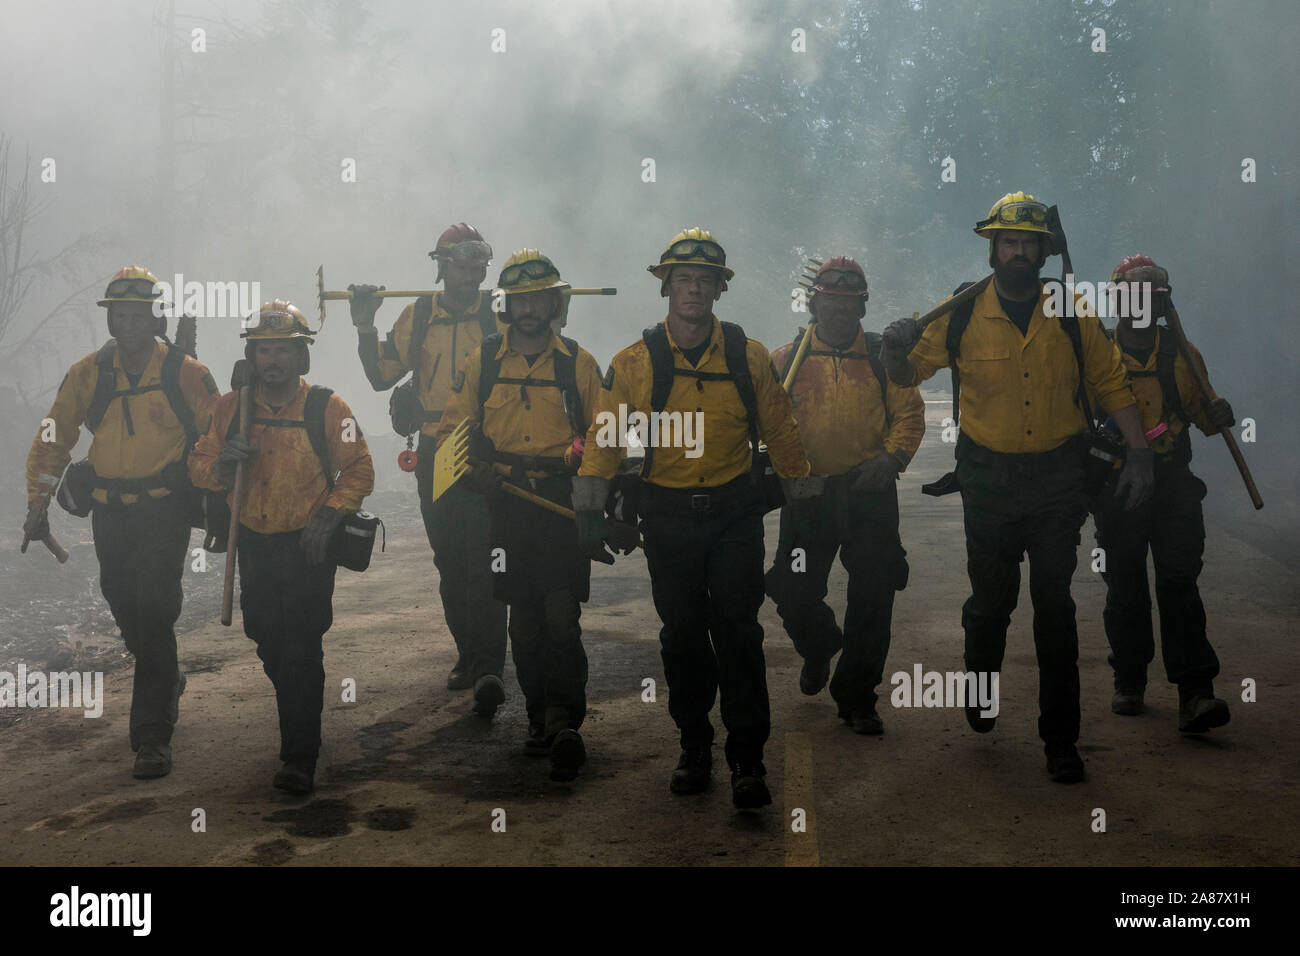 RELEASE DATE: November 8, 2019 TITLE: Playing With Fire STUDIO: Paramount Pictures DIRECTOR: Andy Fickman PLOT: A crew of rugged firefighters meet their match when attempting to rescue three rambunctious kids. STARRING: KEEGAN-MICHAEL KEY, JOHN CENA as Jake Carson, TYLER MANE as Axe. (Credit Image: © Paramount Pictures/Entertainment Pictures) Stock Photo